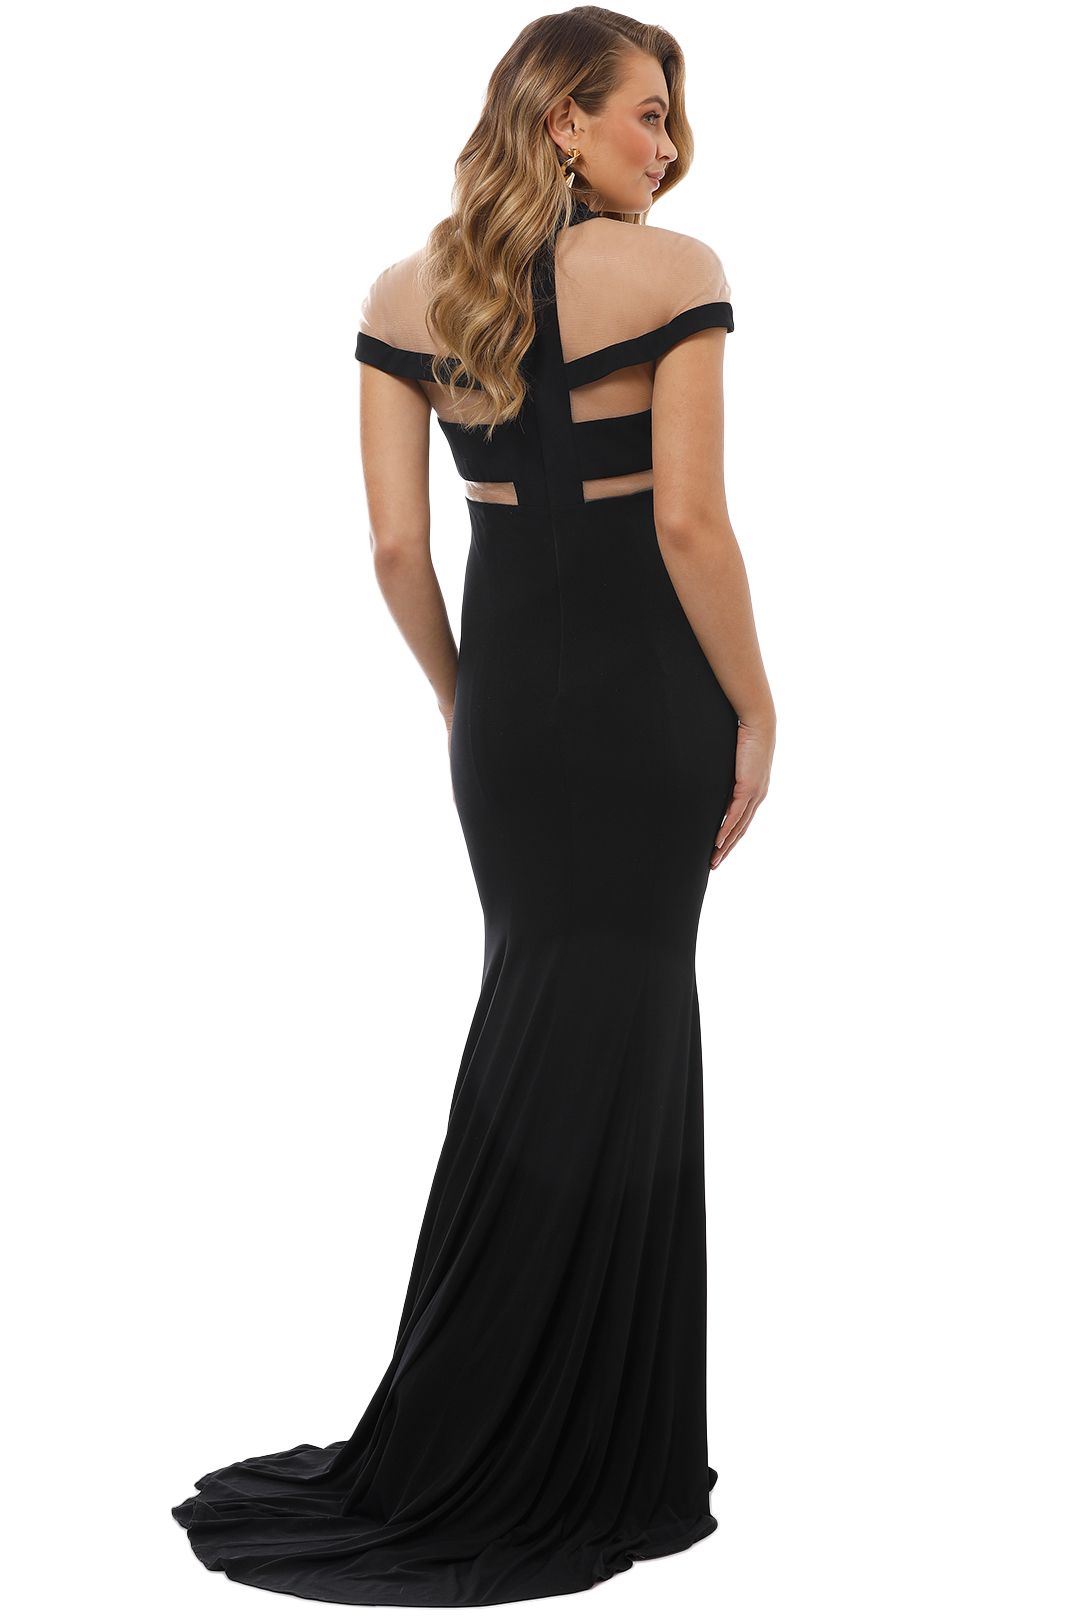 Grace and Hart - Muse Gown - Black - Back